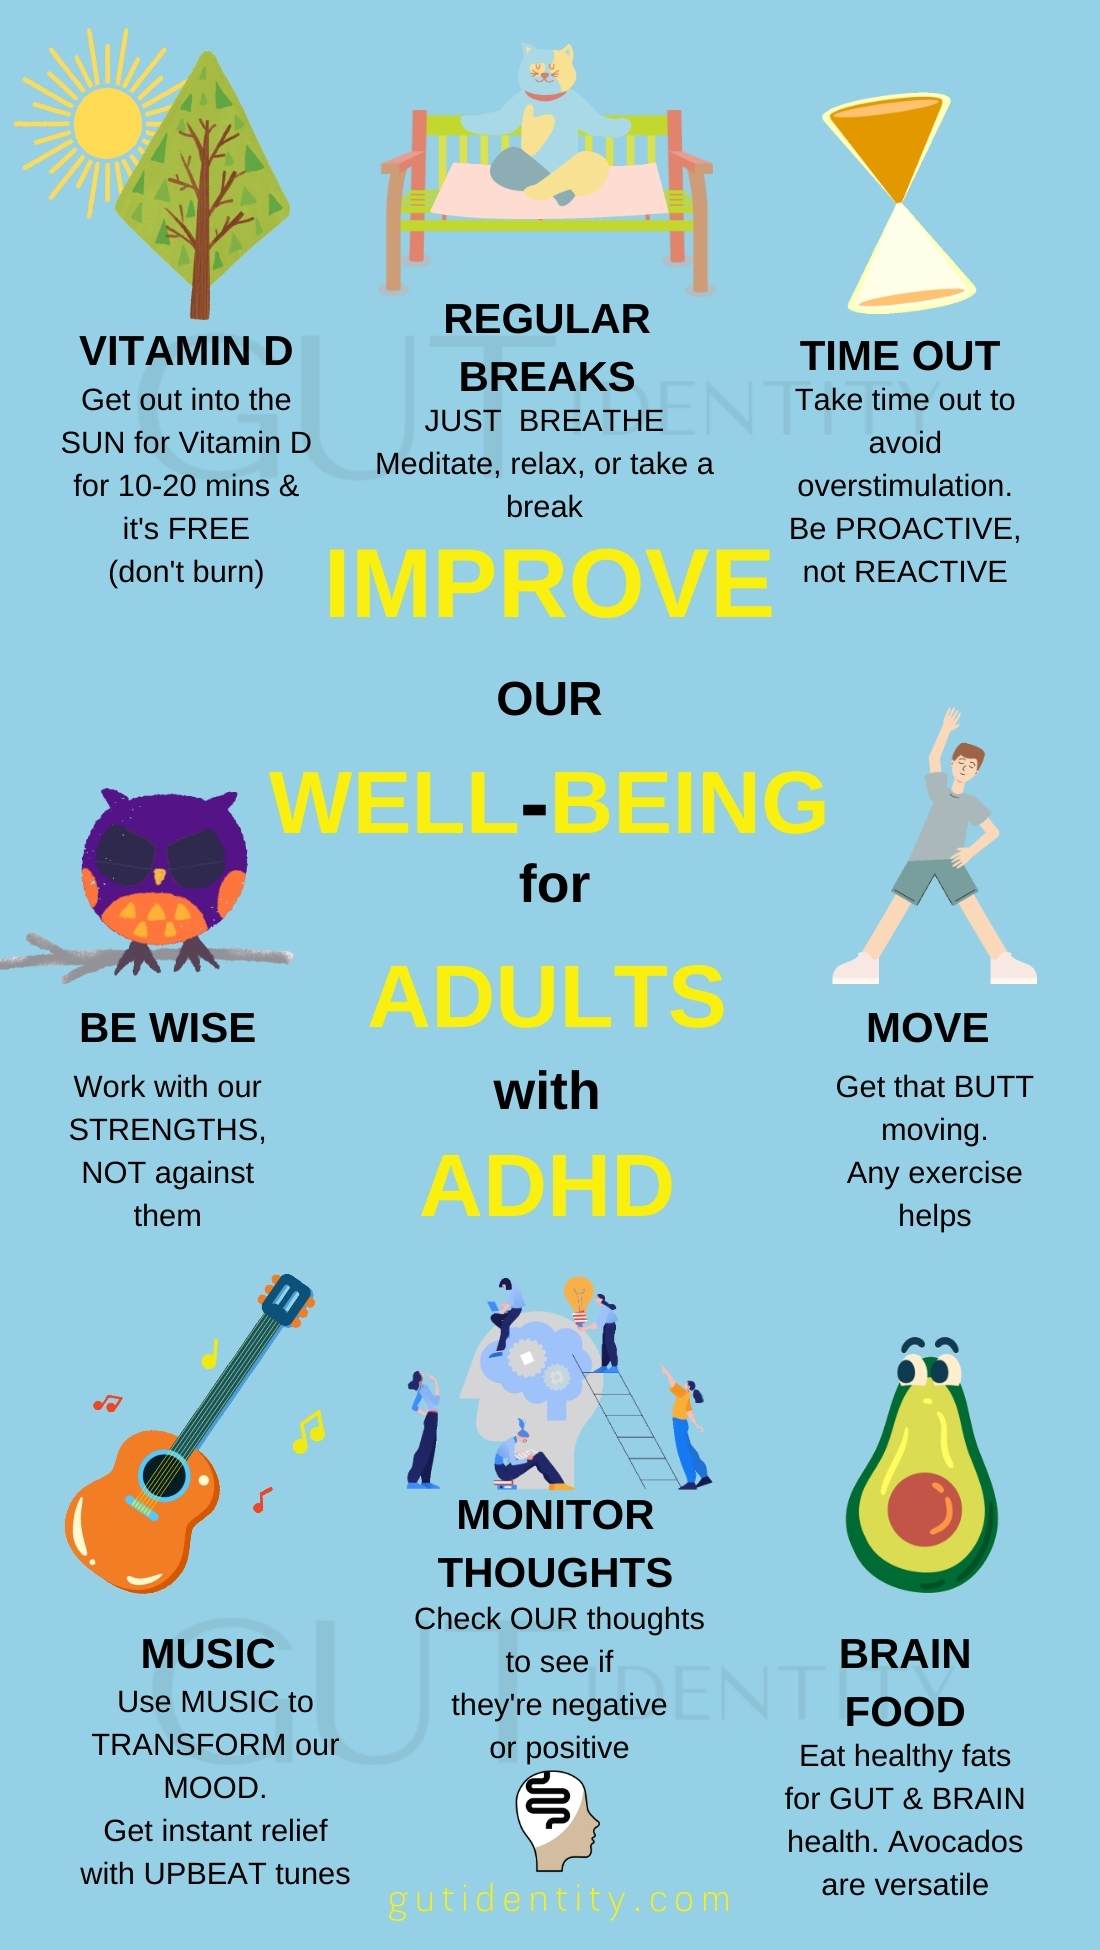 Improve Our Wellbeing for Adults with ADHD by Gutidentity